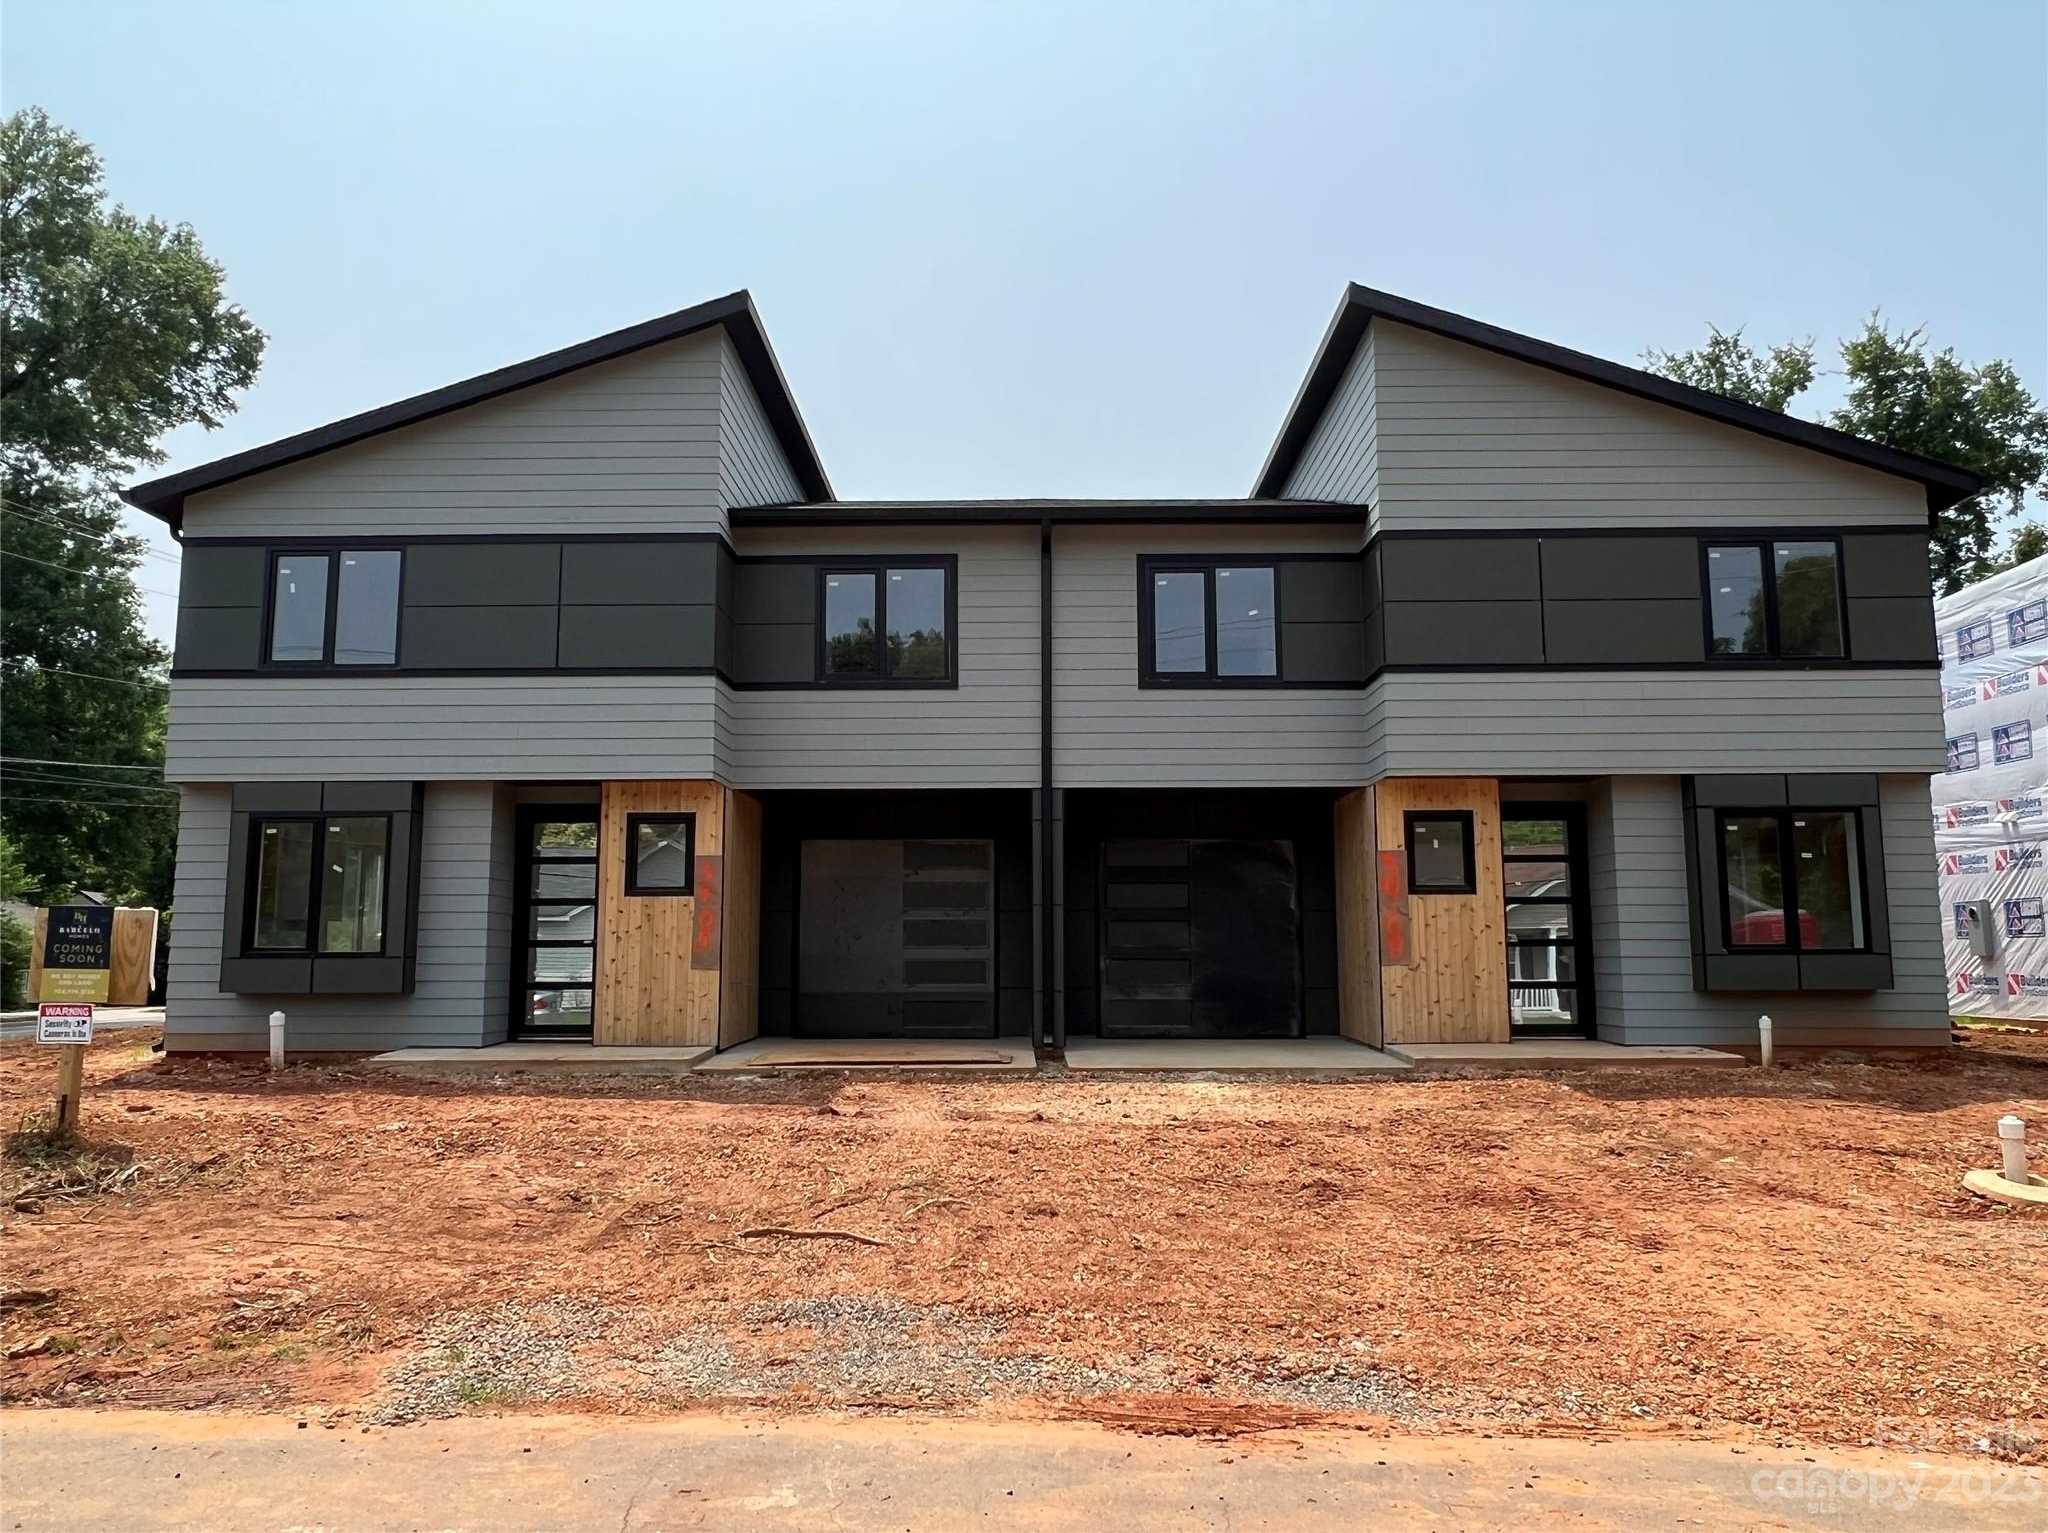 View Charlotte, NC 28208 townhome